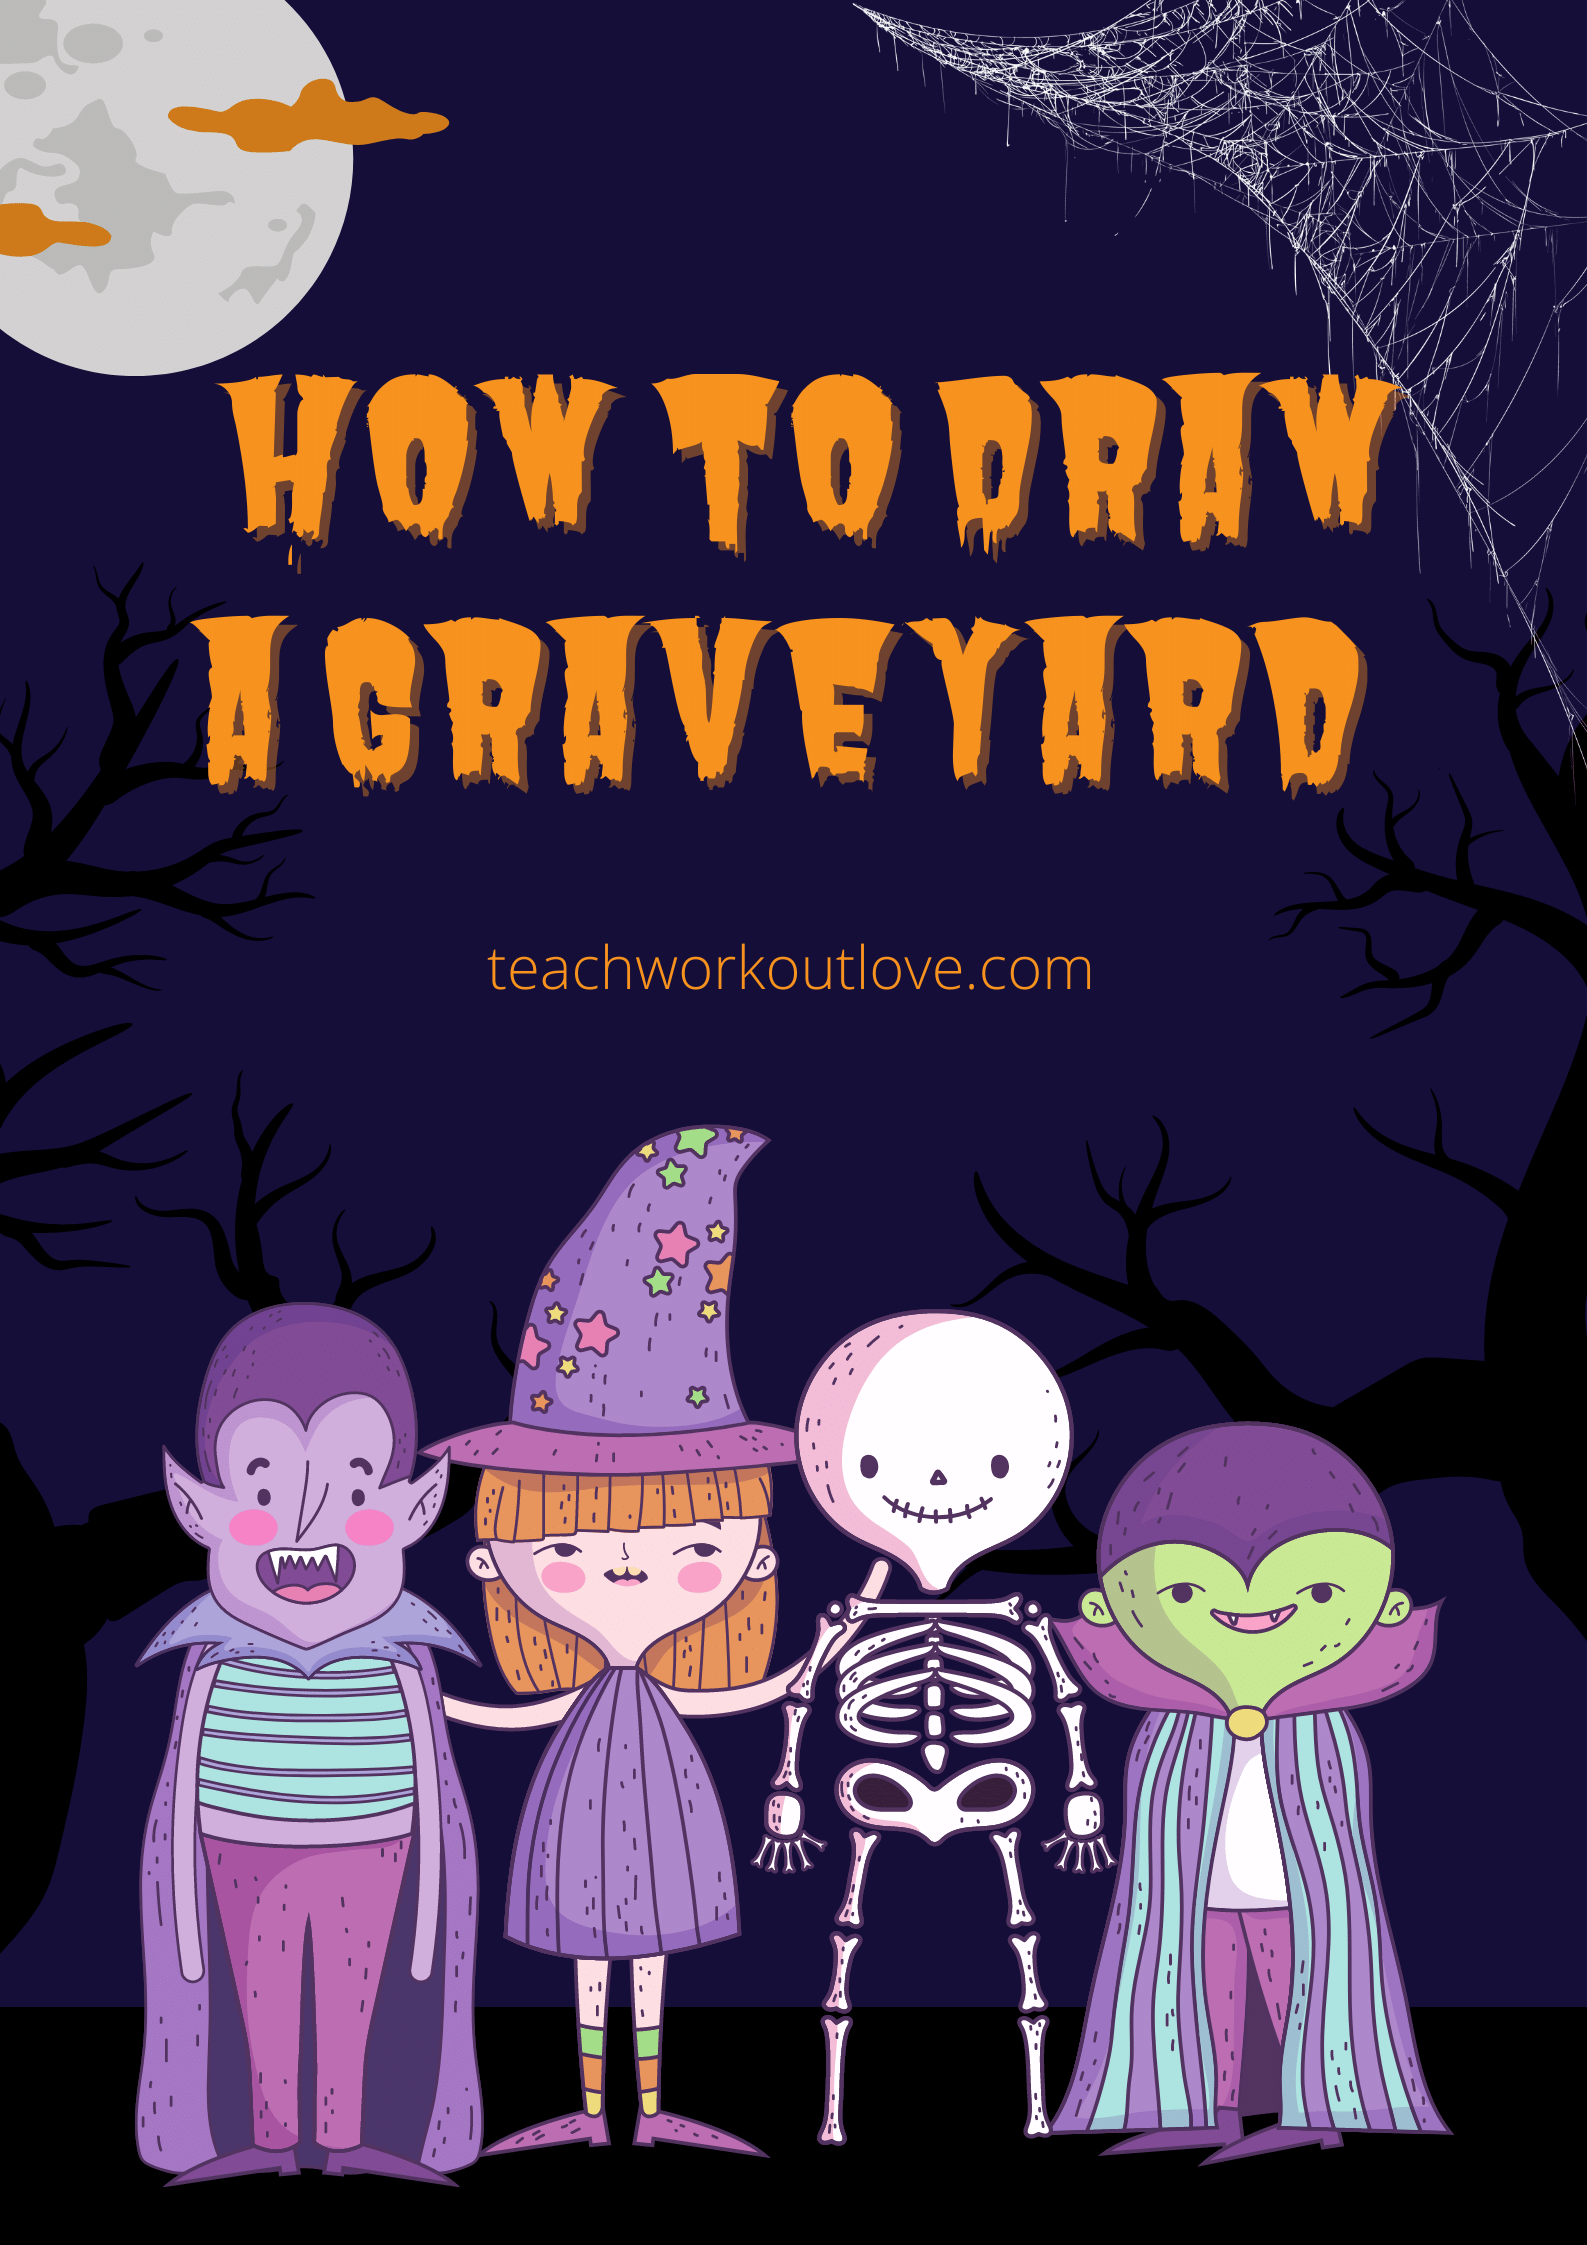  How to Draw a Graveyard 